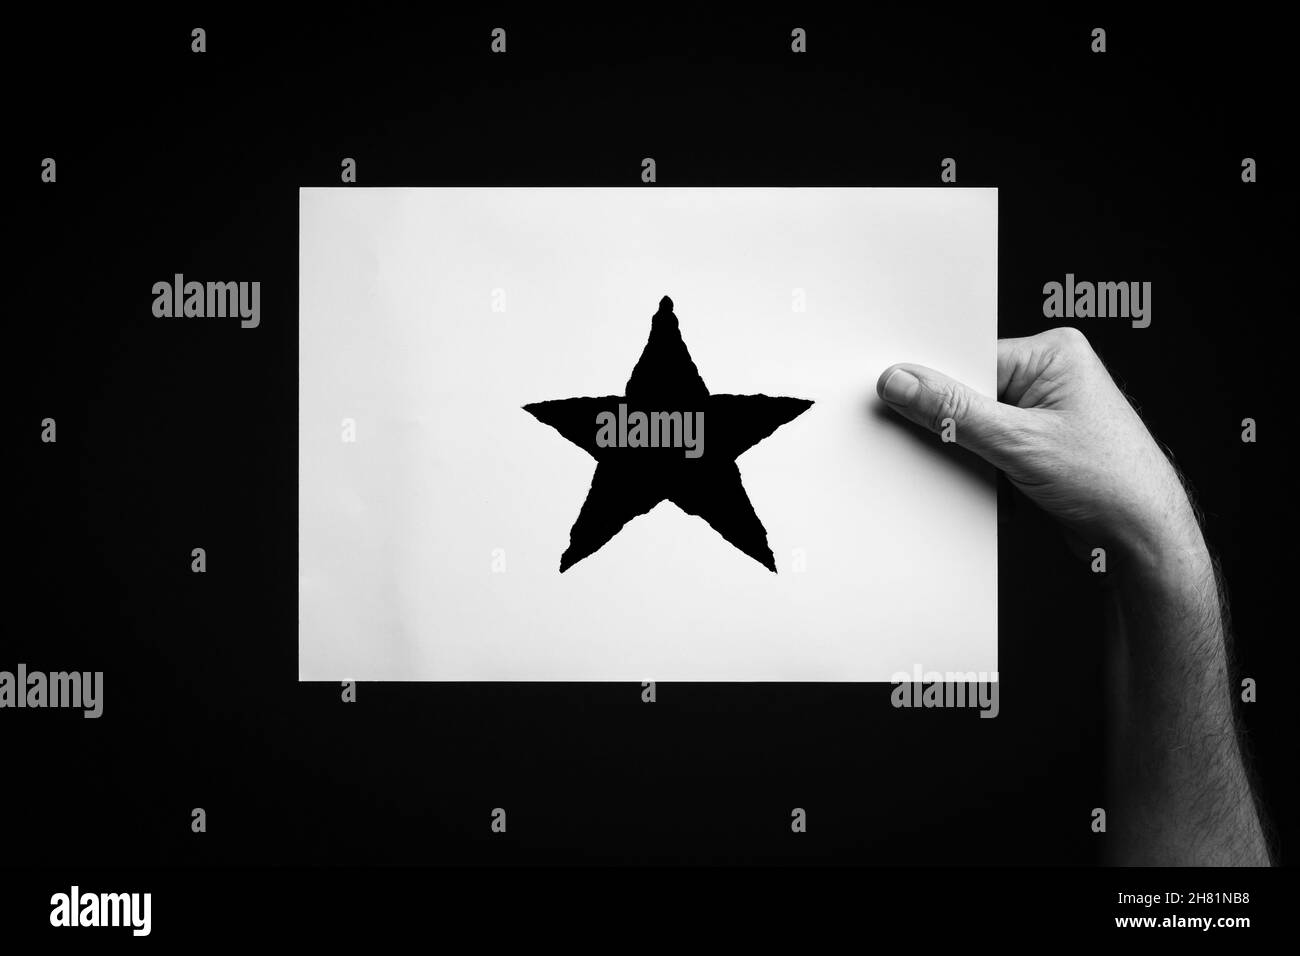 B+W image of male hand holding sheet of paper with christmas star symbol against black background. Stock Photo